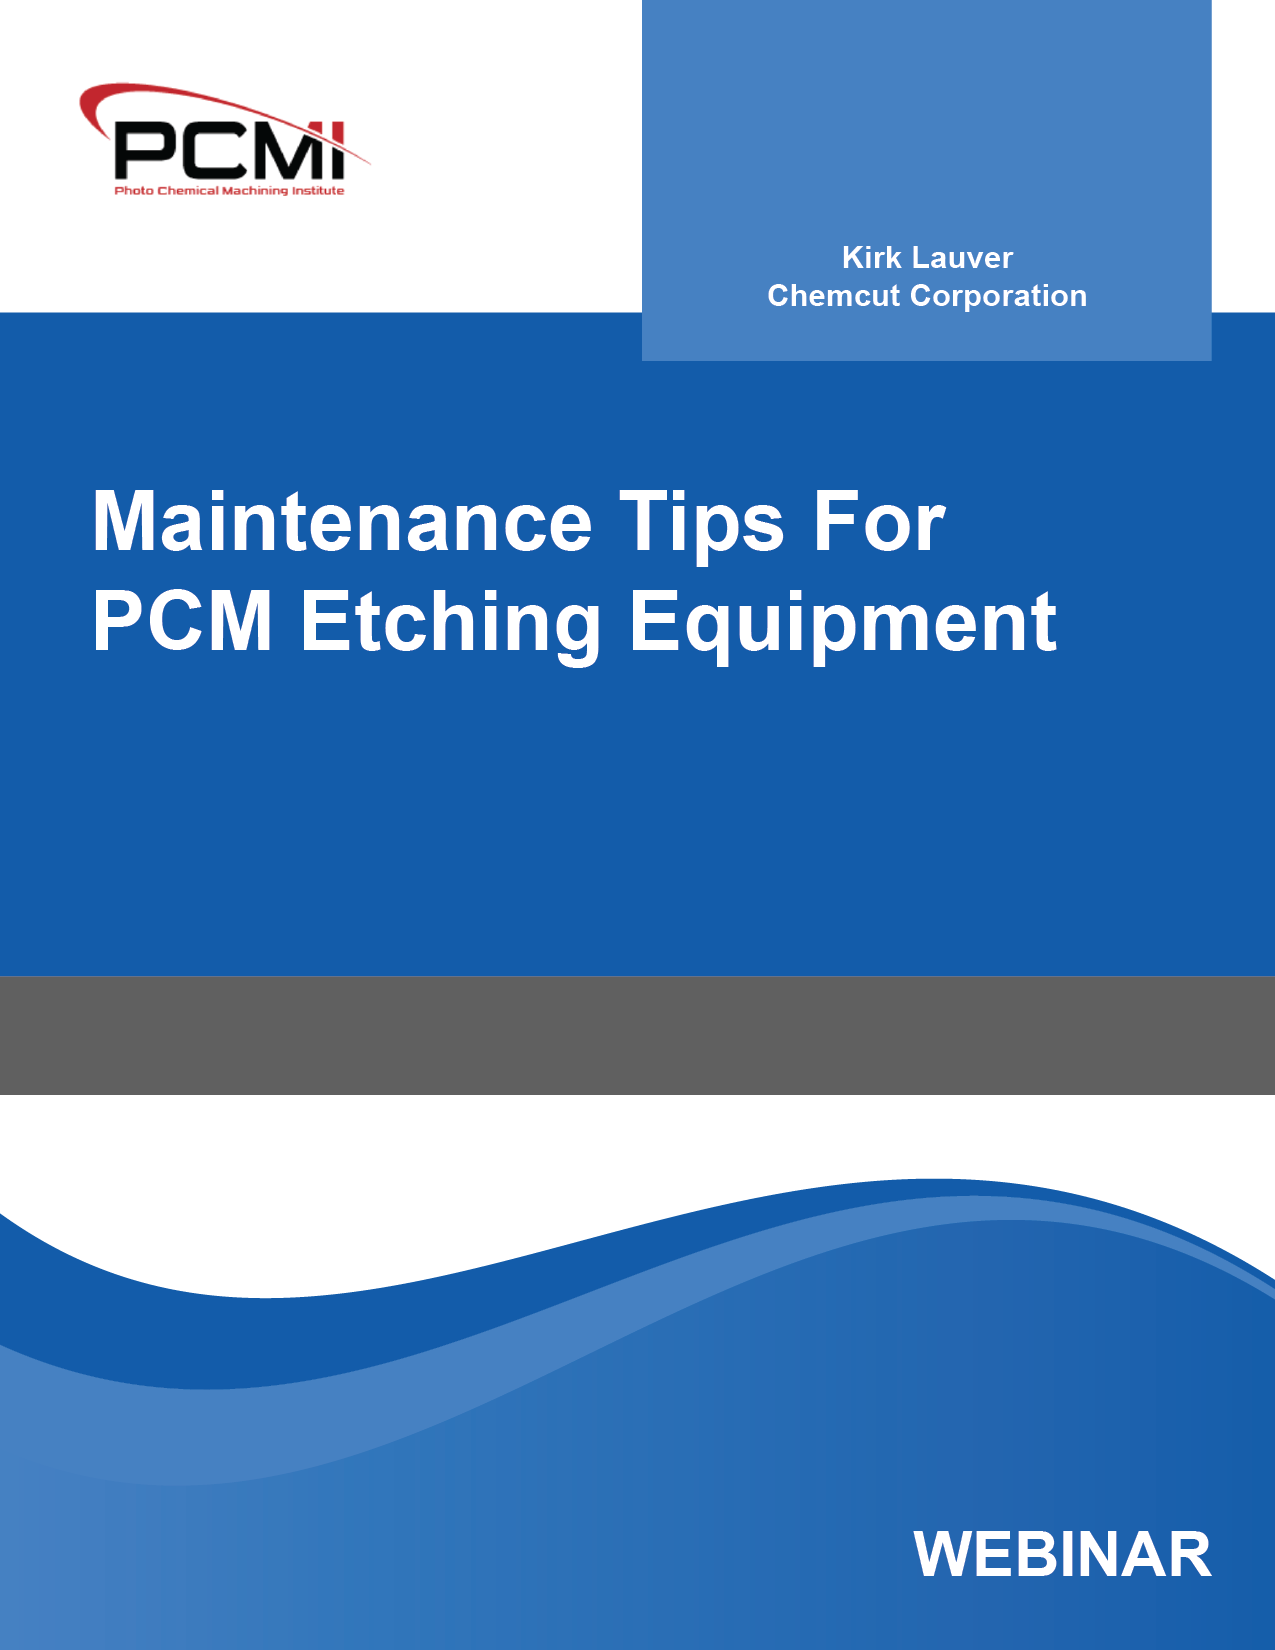 Maintenance Tips For PCM Etching Equipment